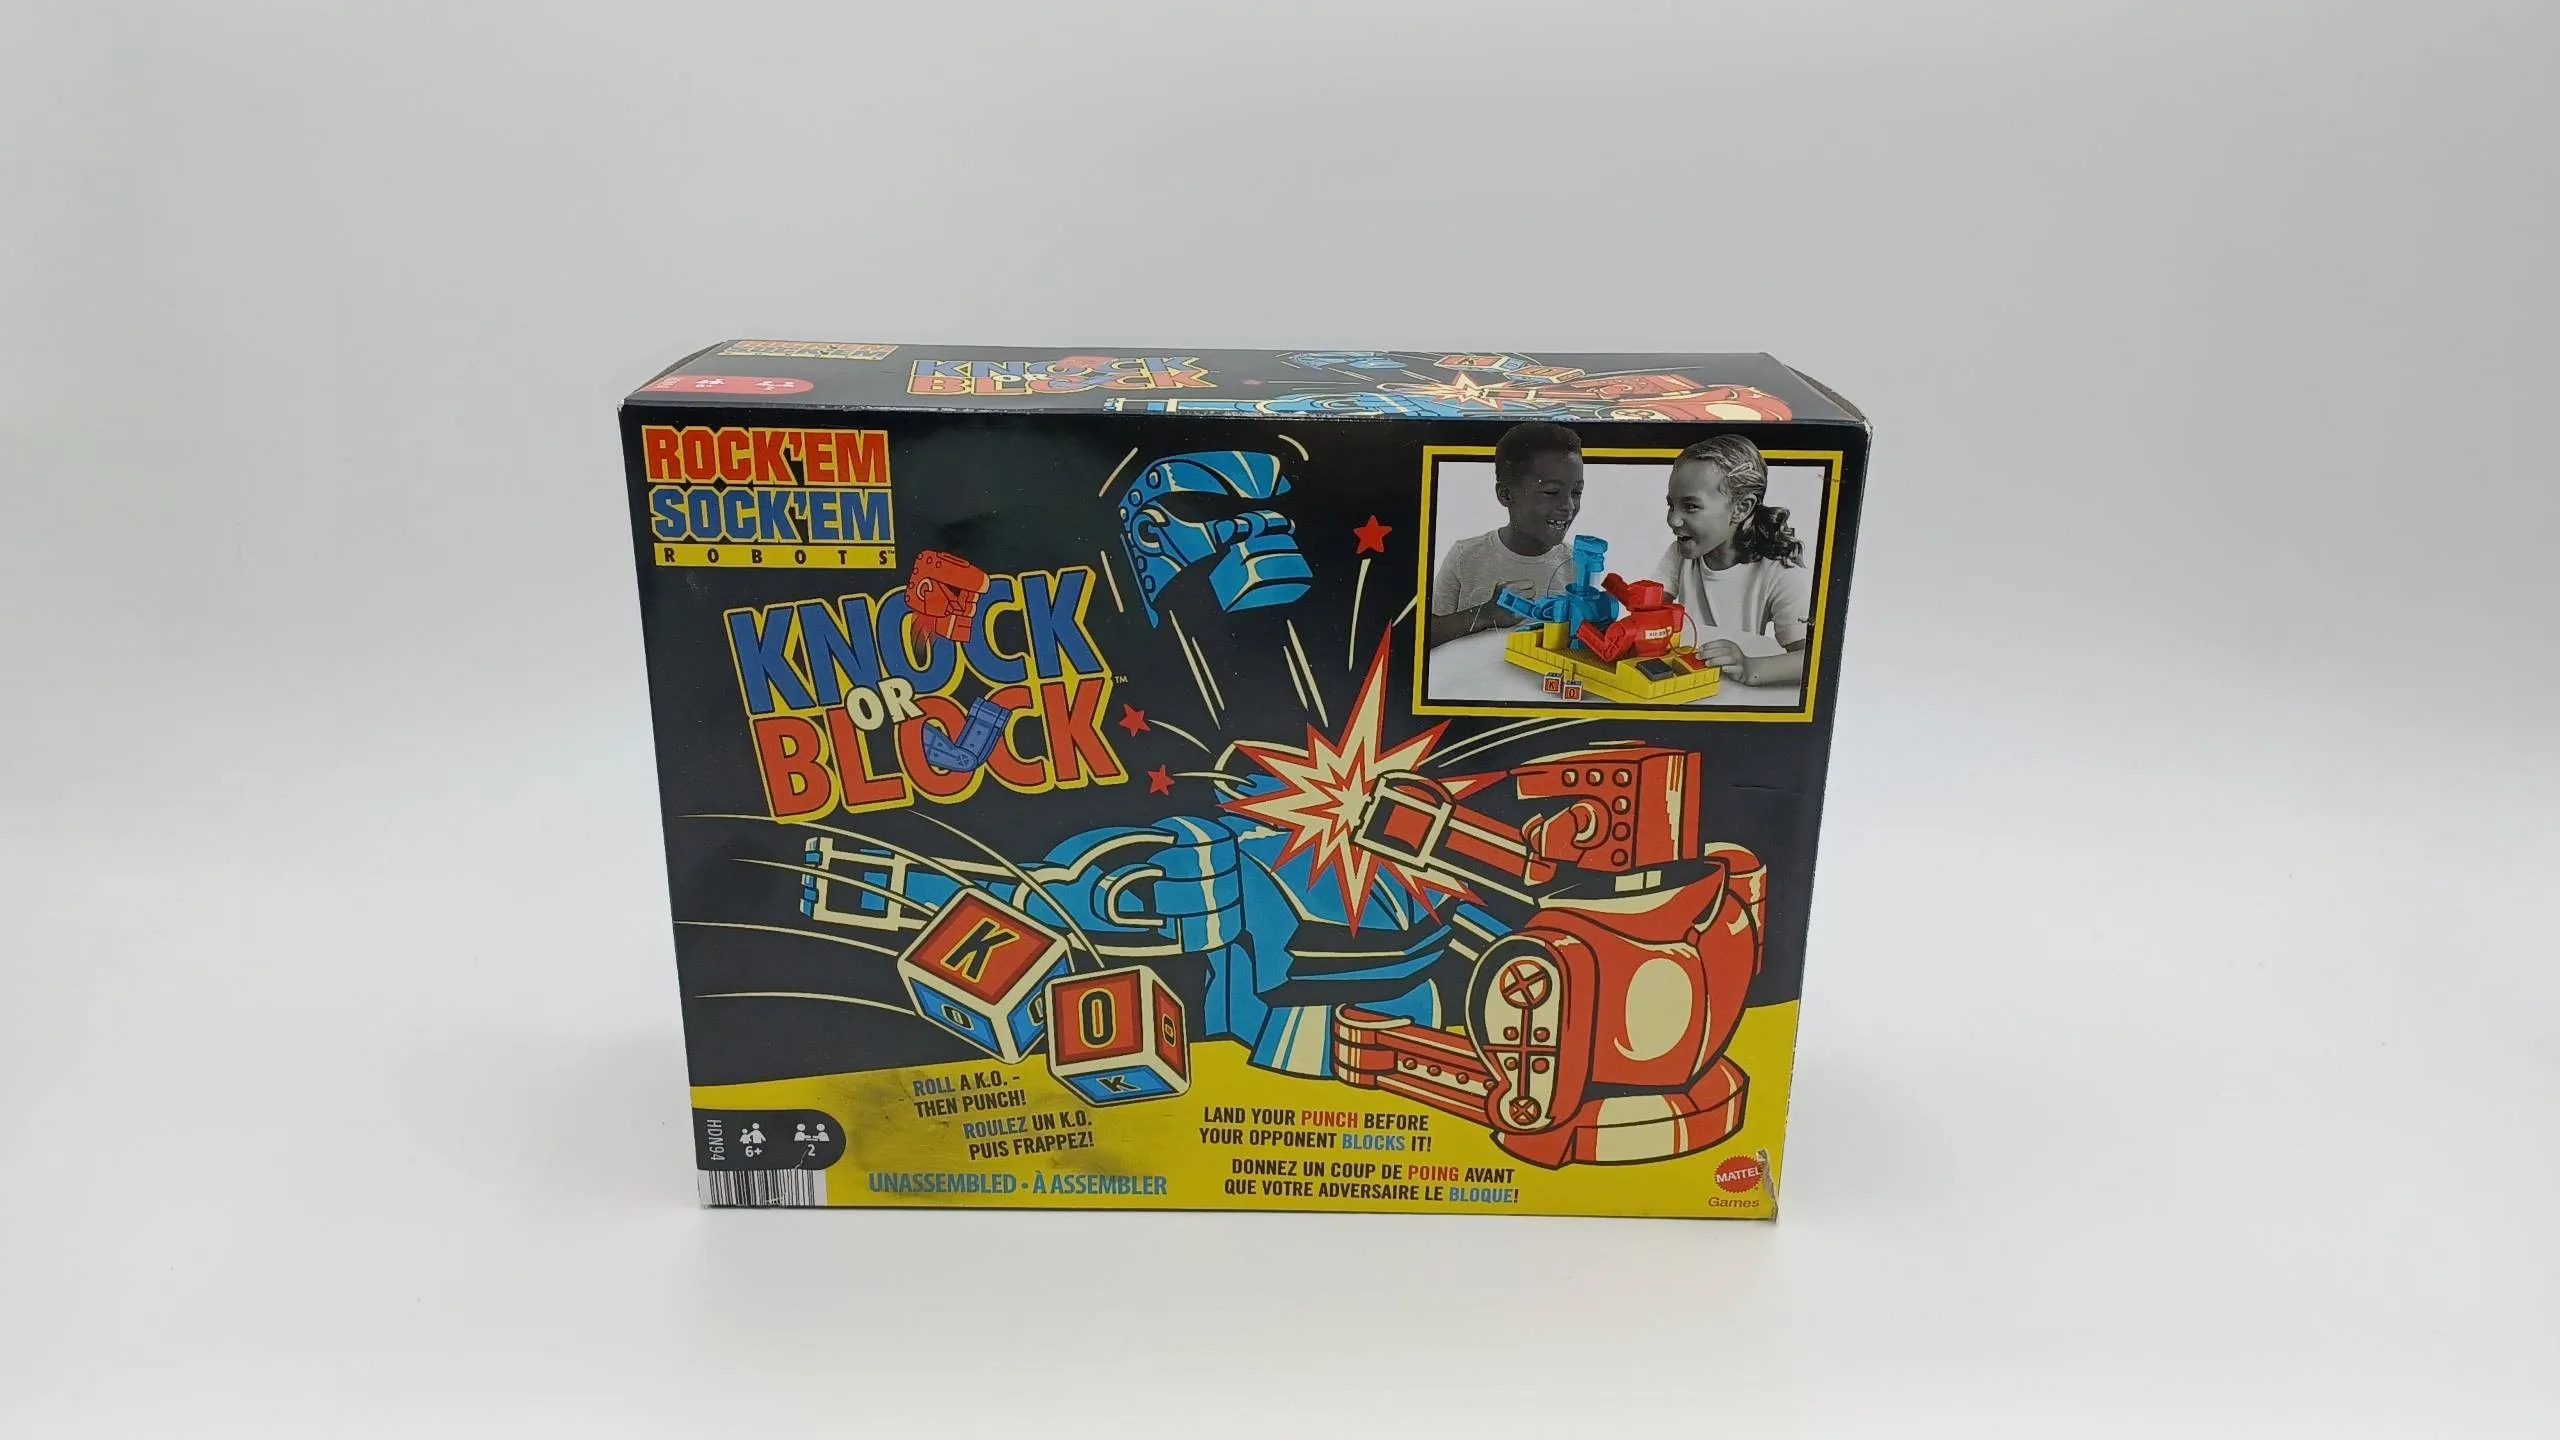 A picture of the box for Rock 'em Sock 'em Robots: Knock or Block.